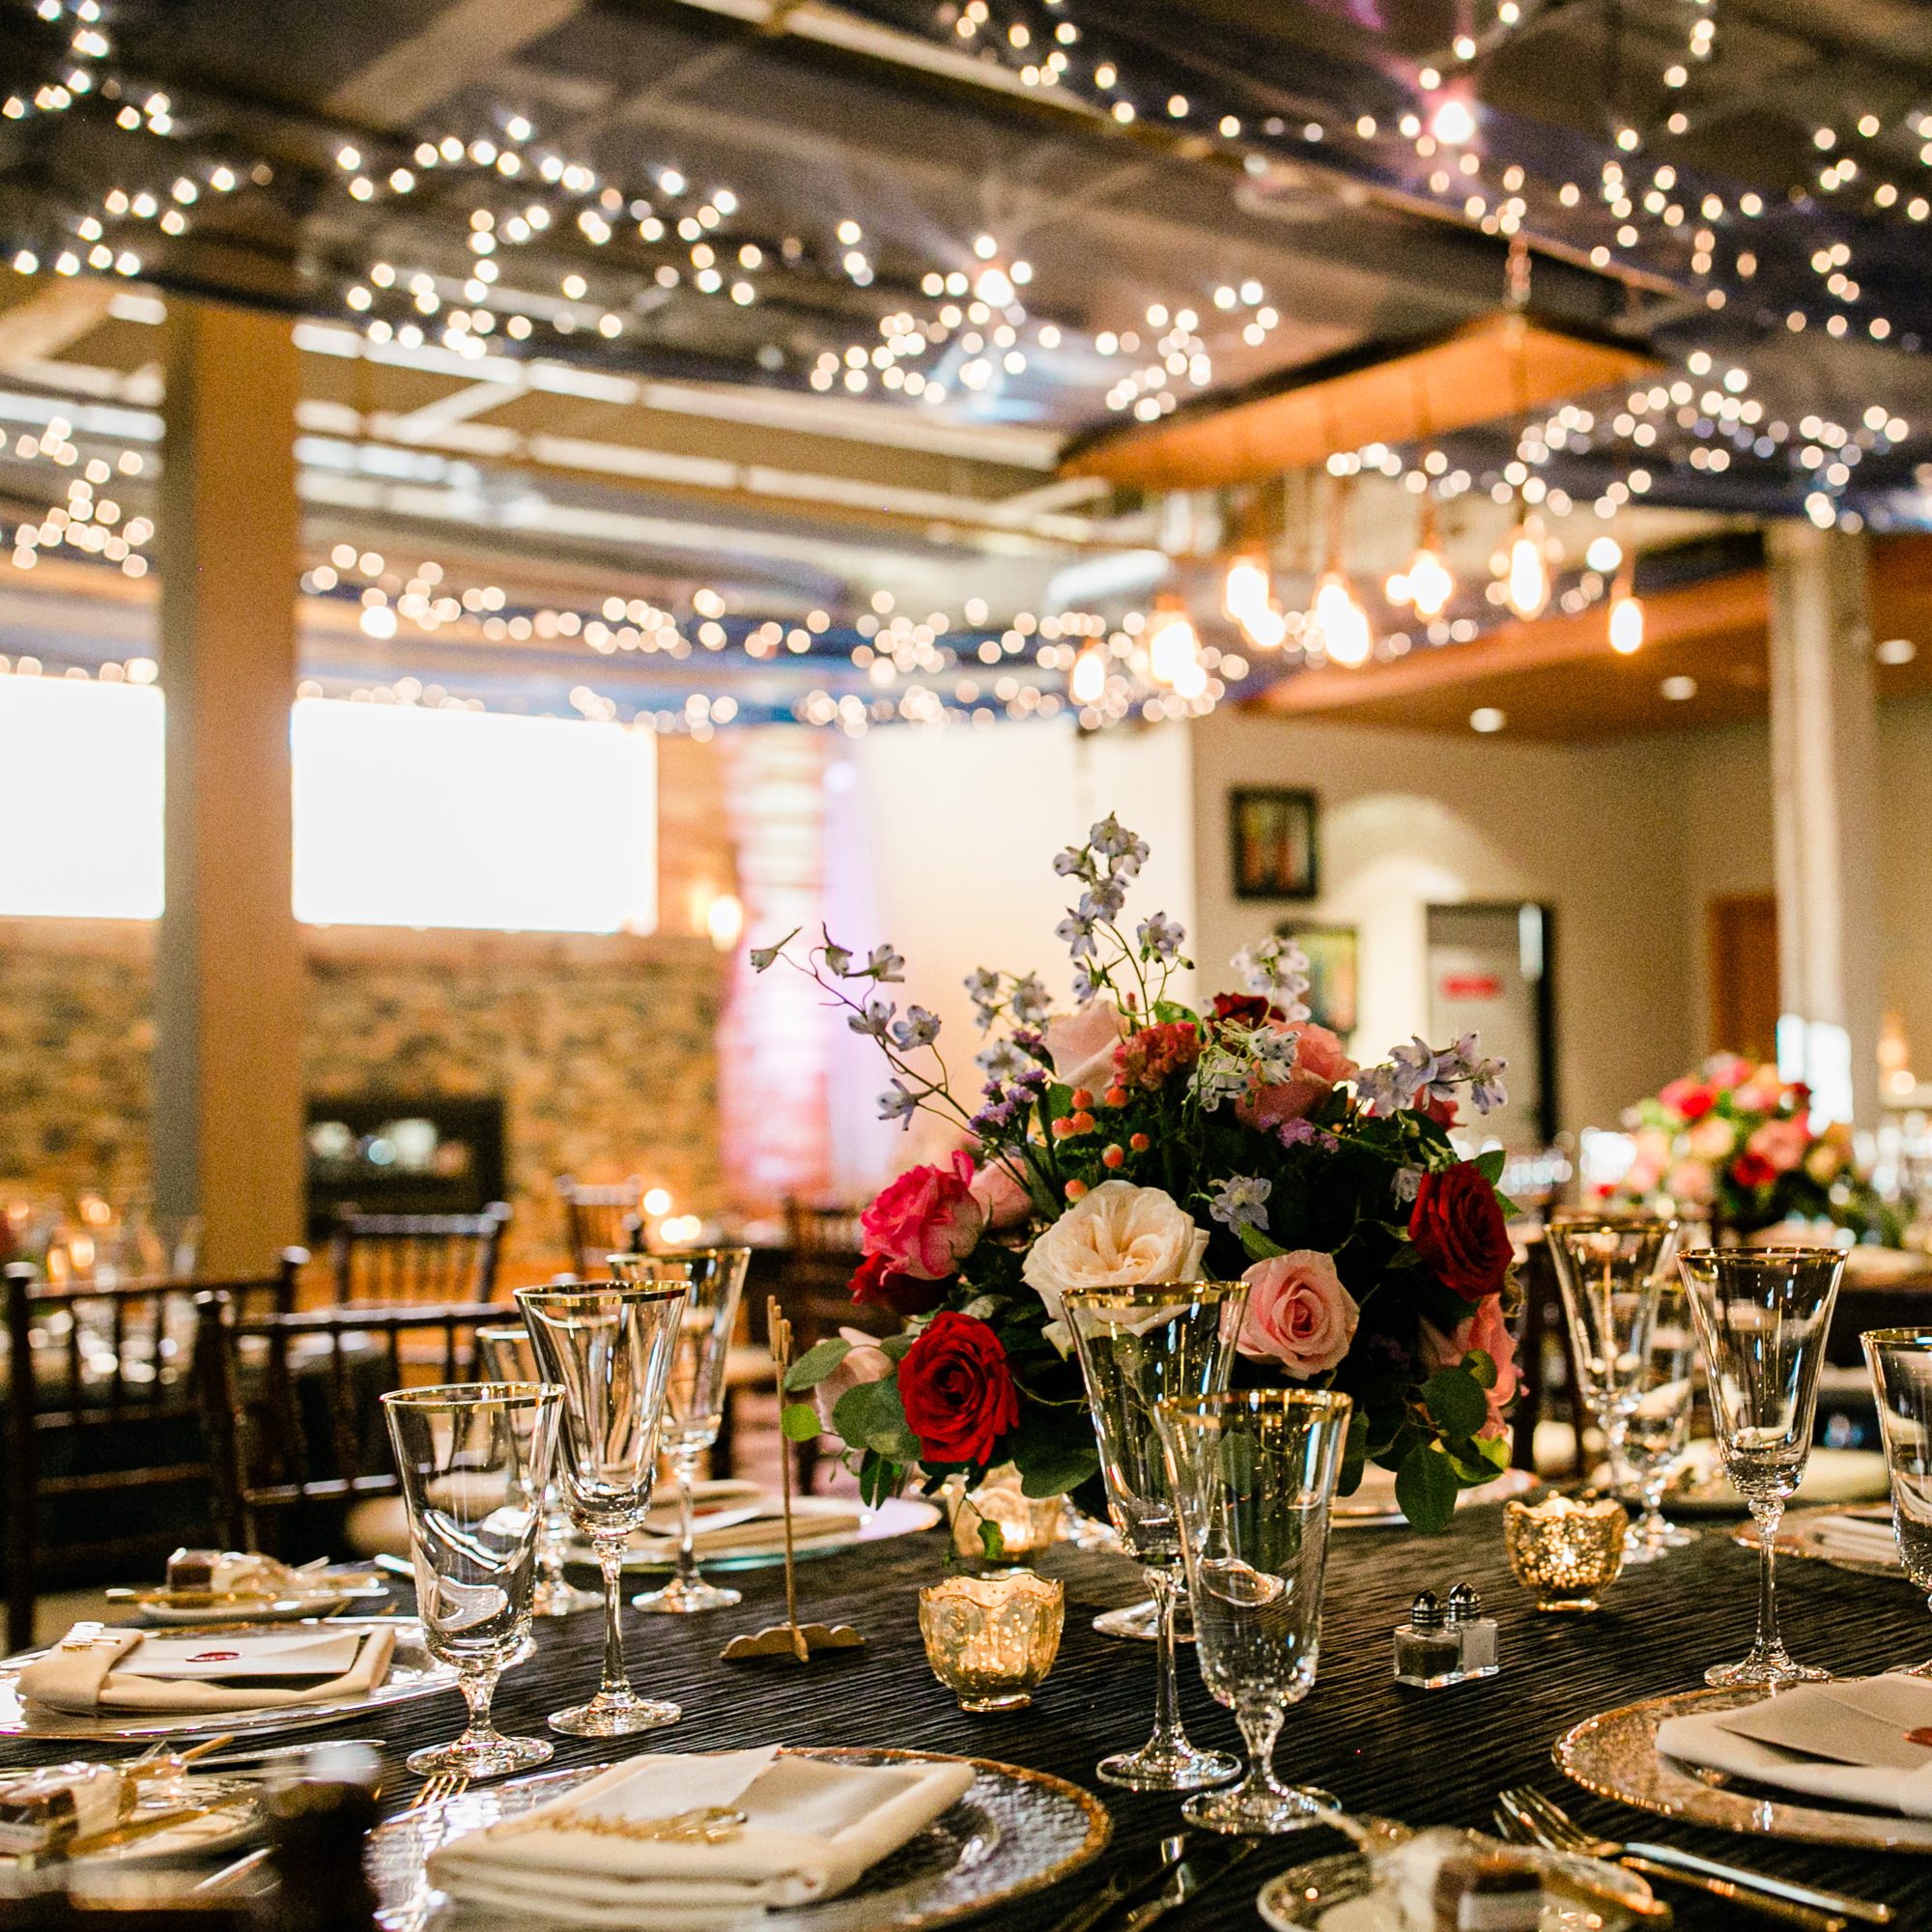 Emma and Joe Wedding Decor at The Foundry by Herban Feast